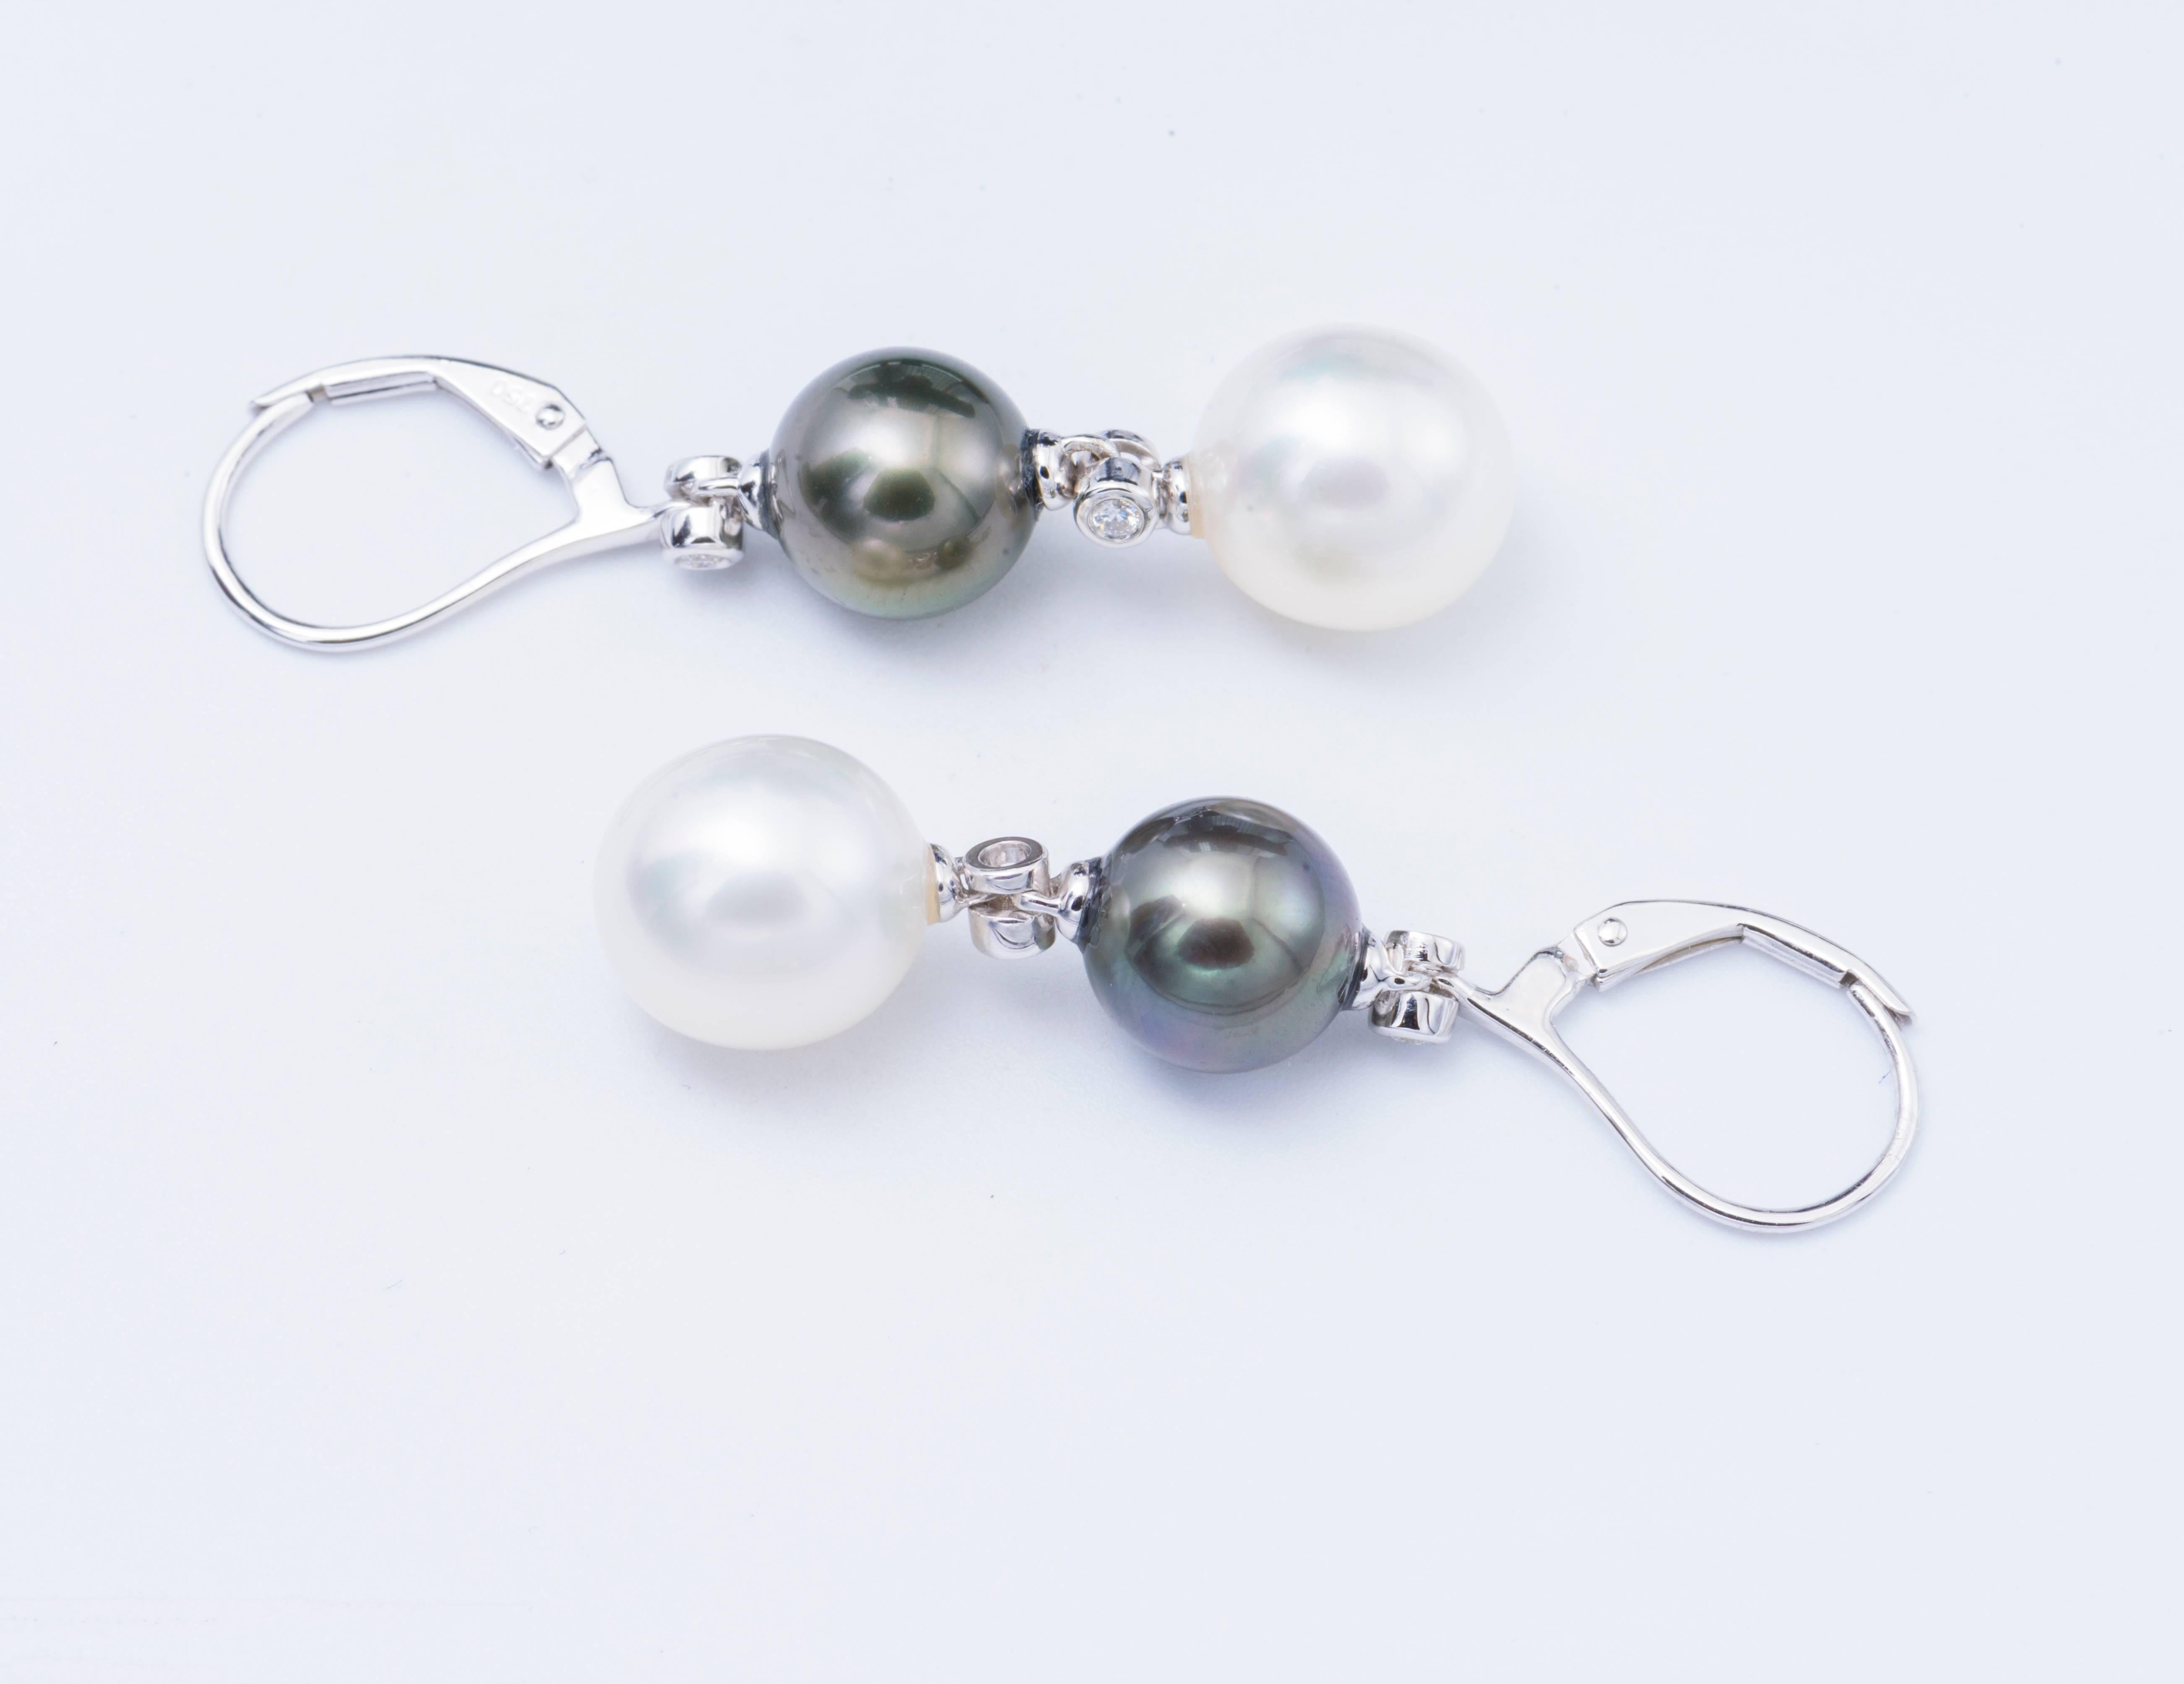 South Sea and Tahitian Pearl: 8-10 mm each
18K white gold 
0.06 Cts. Diamonds